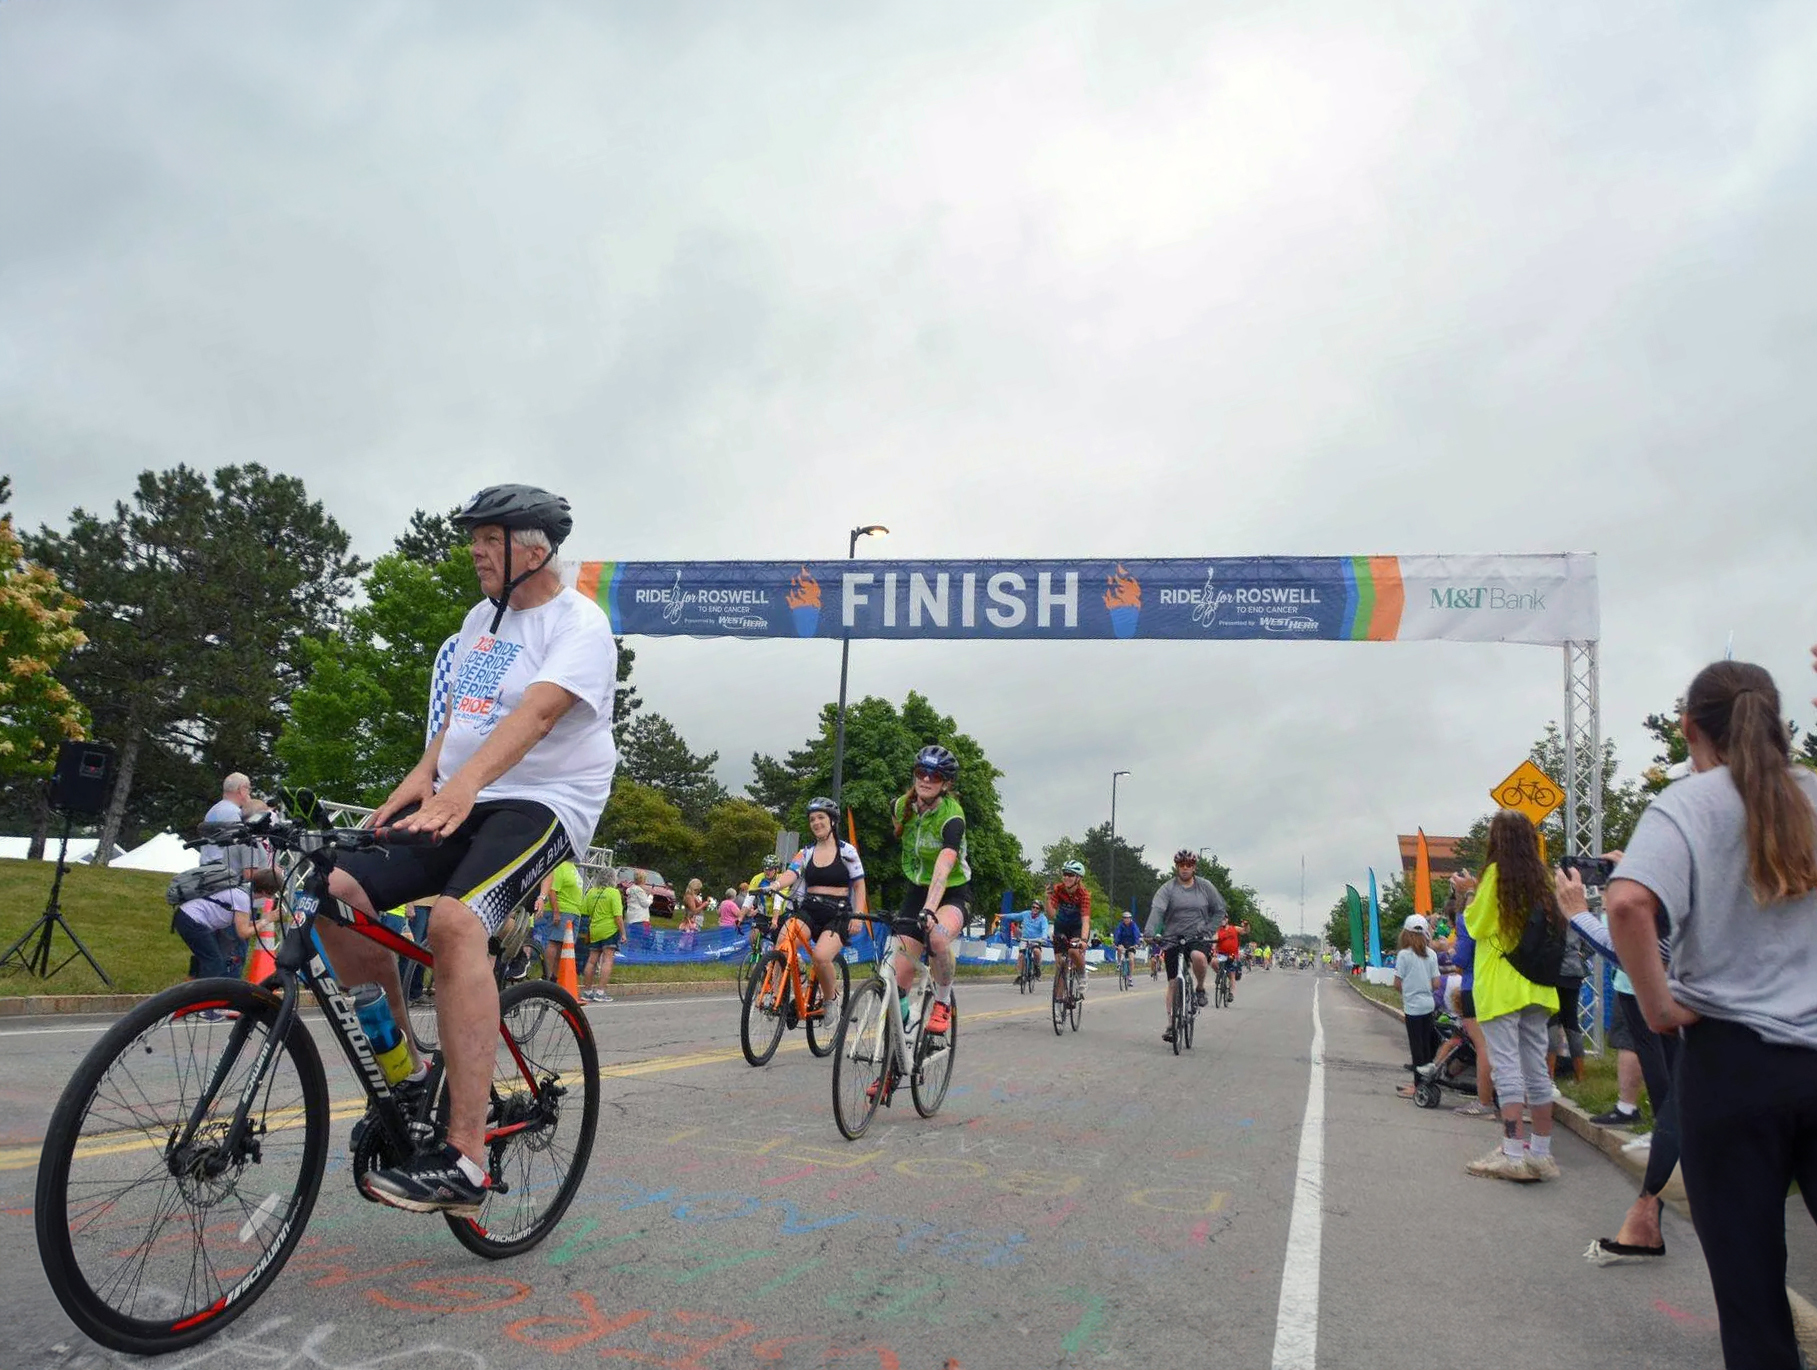 Ride for Roswell finish line banner